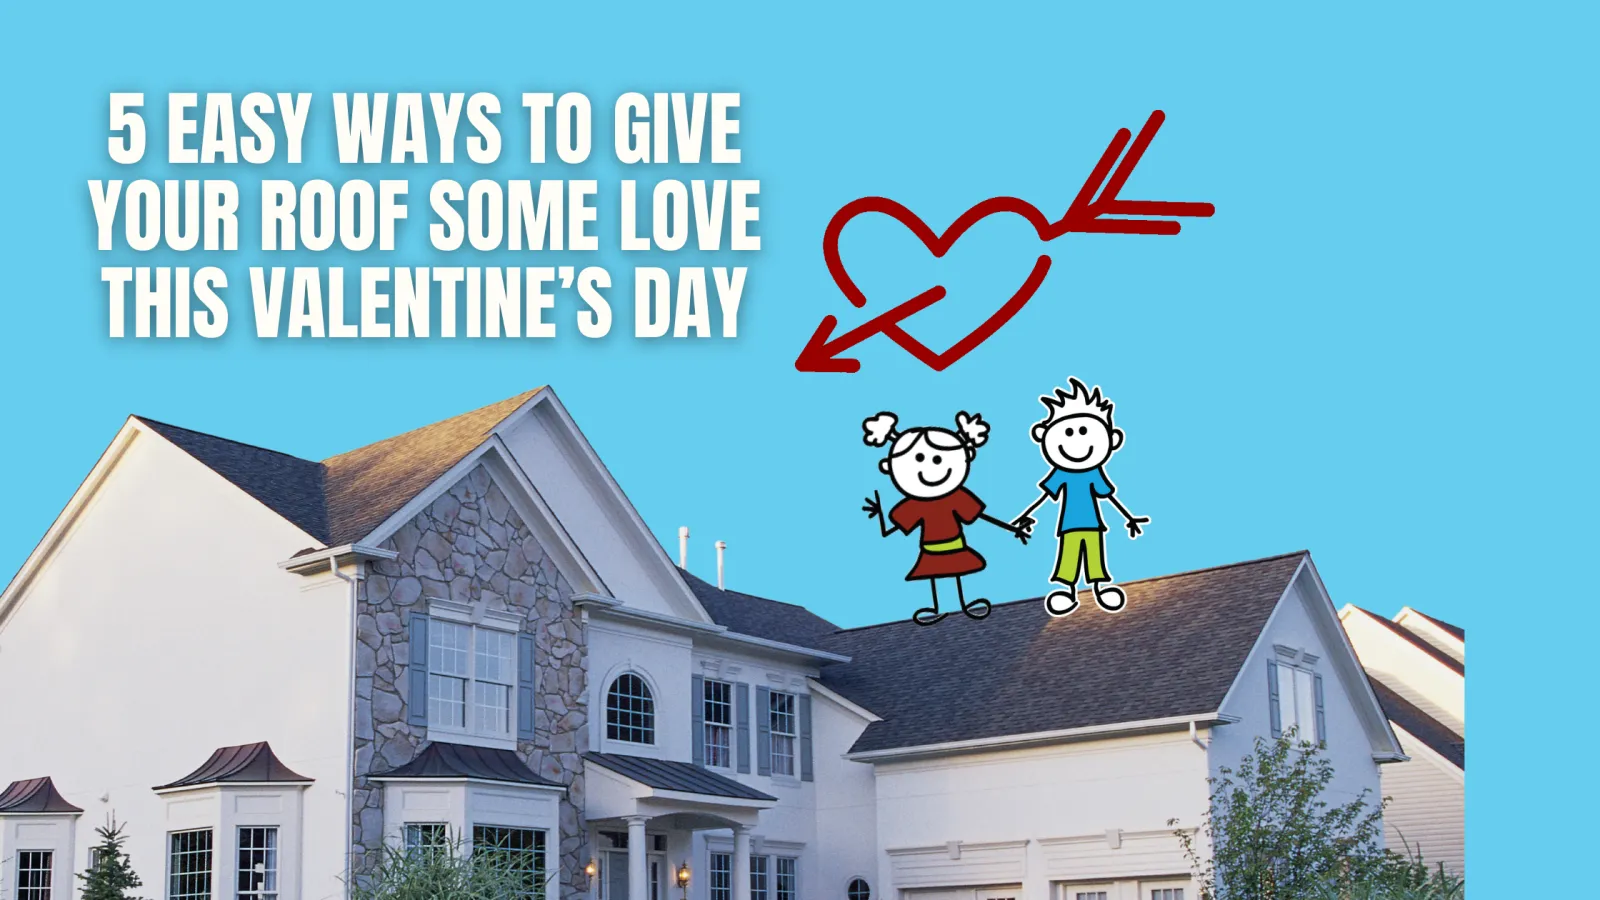 5 easy ways to give your roof some love on valentines day